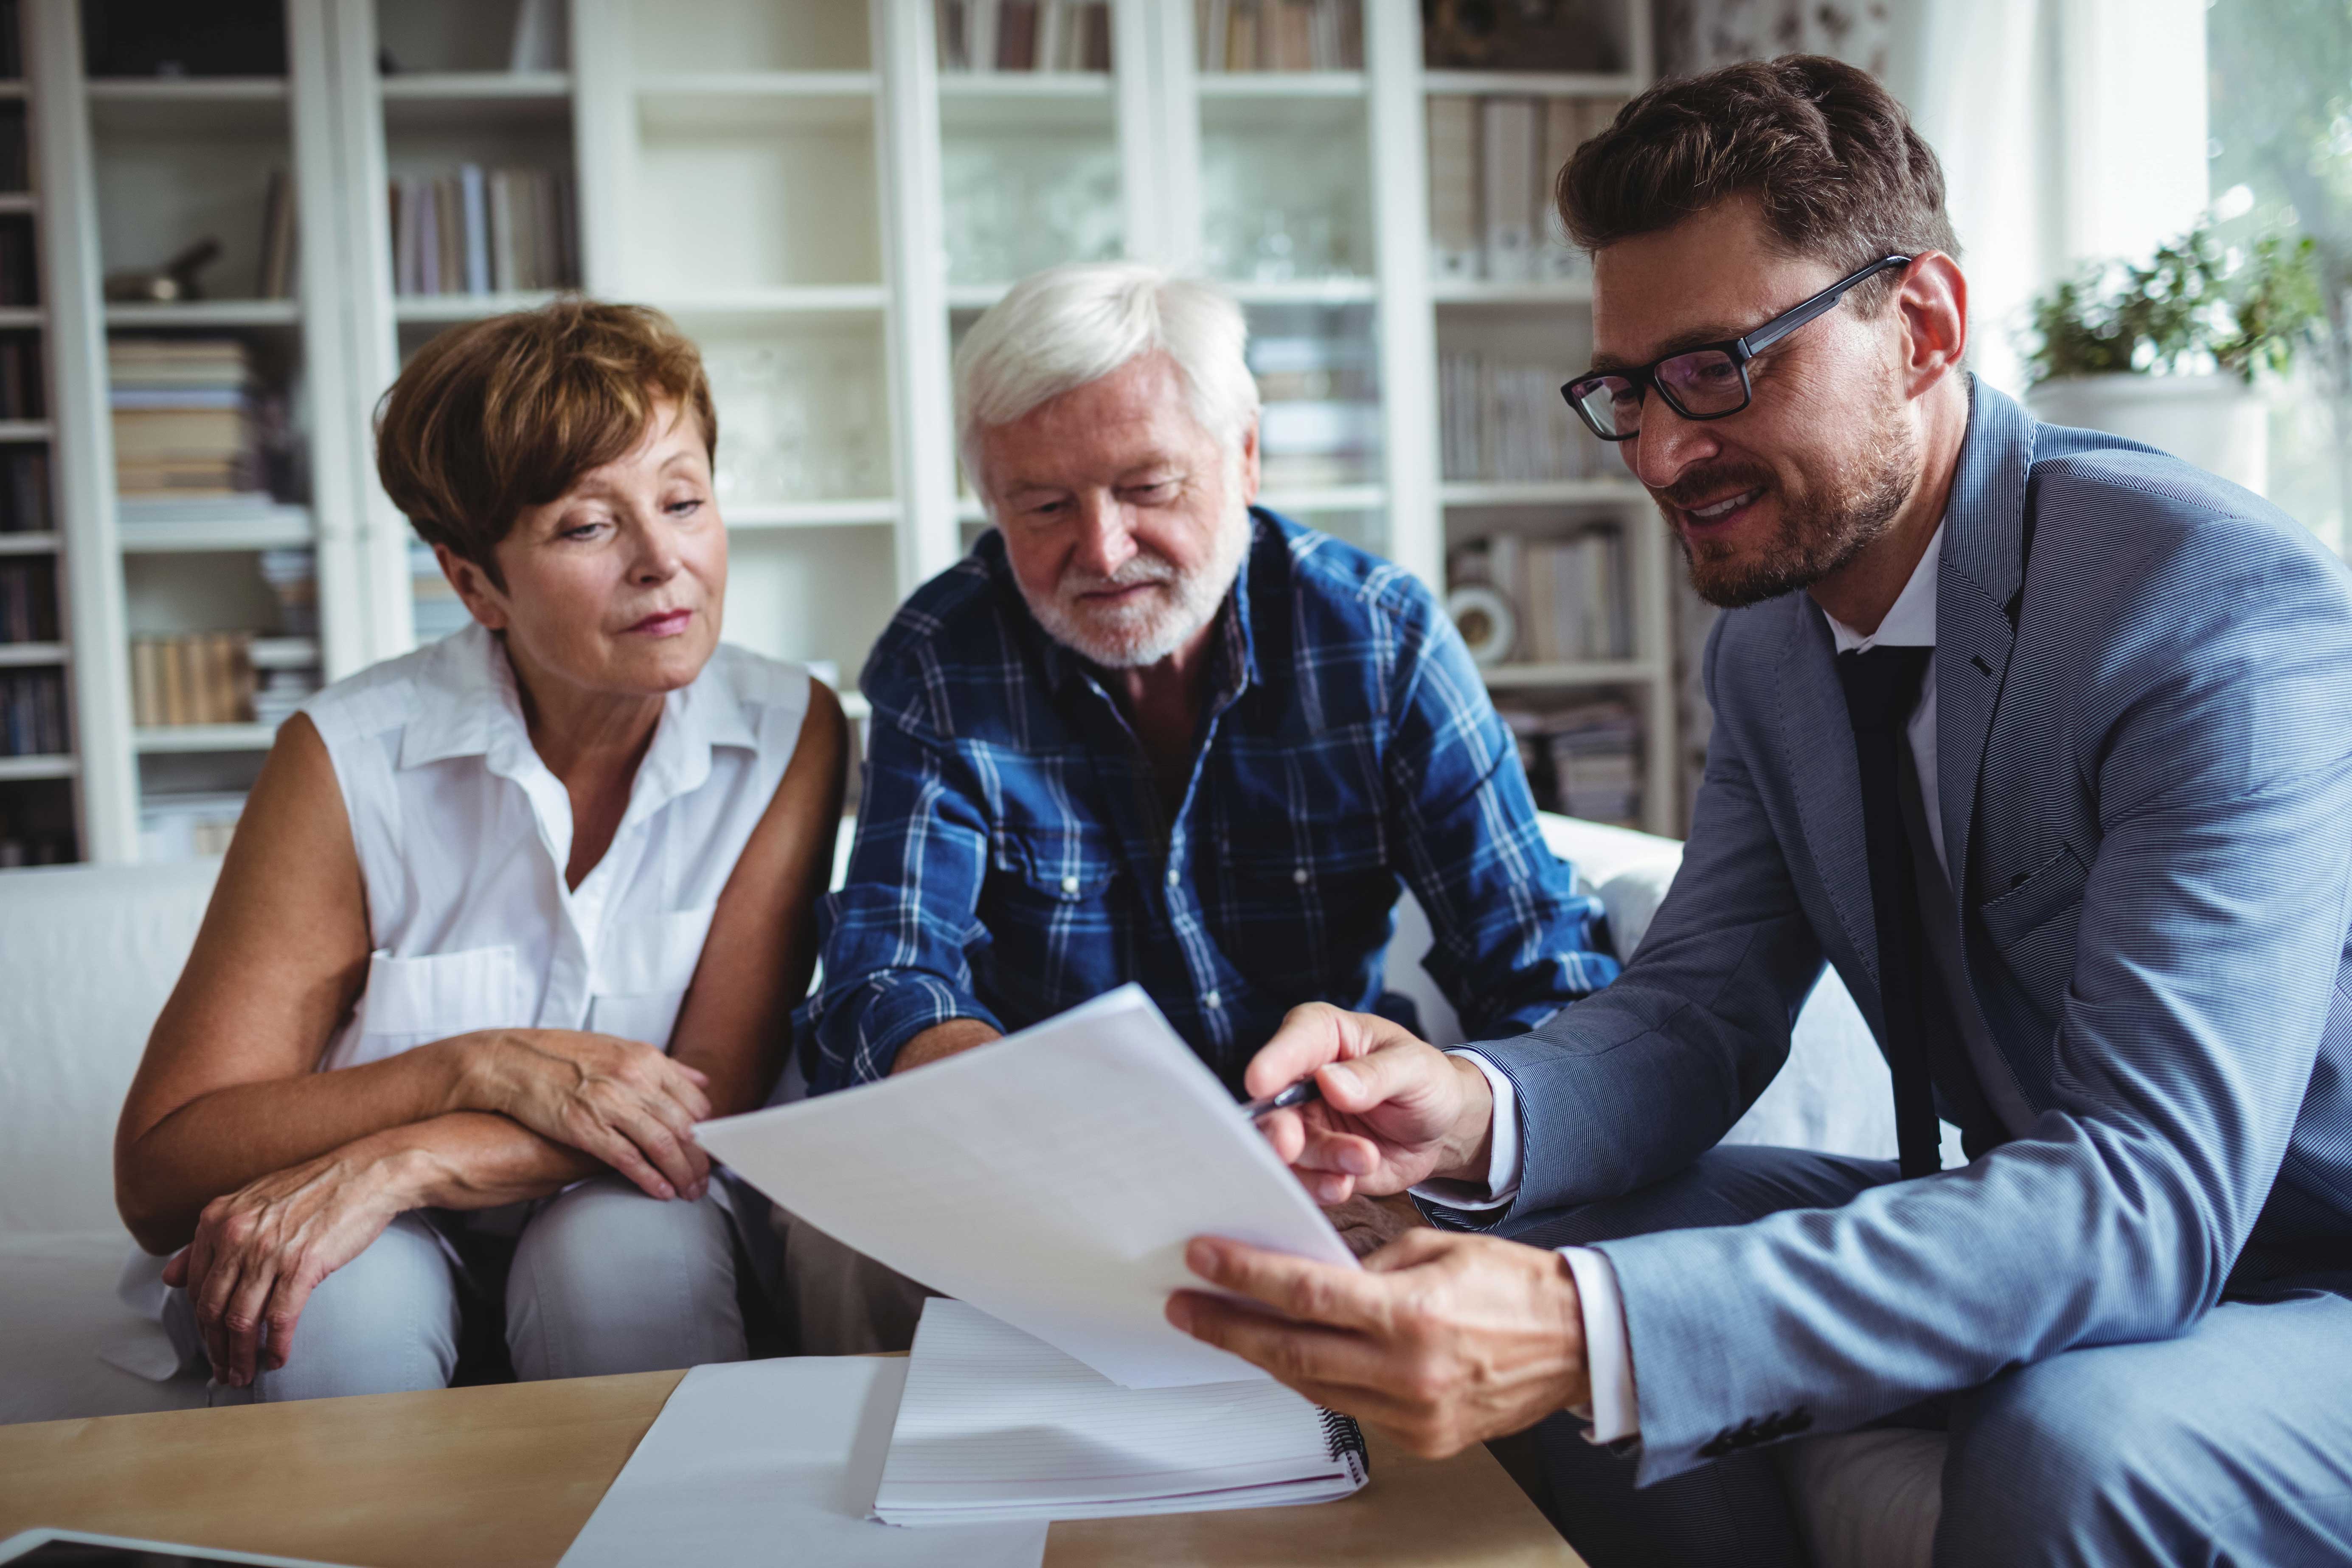 The Fundamental Questions to Ask Before Estate Planning